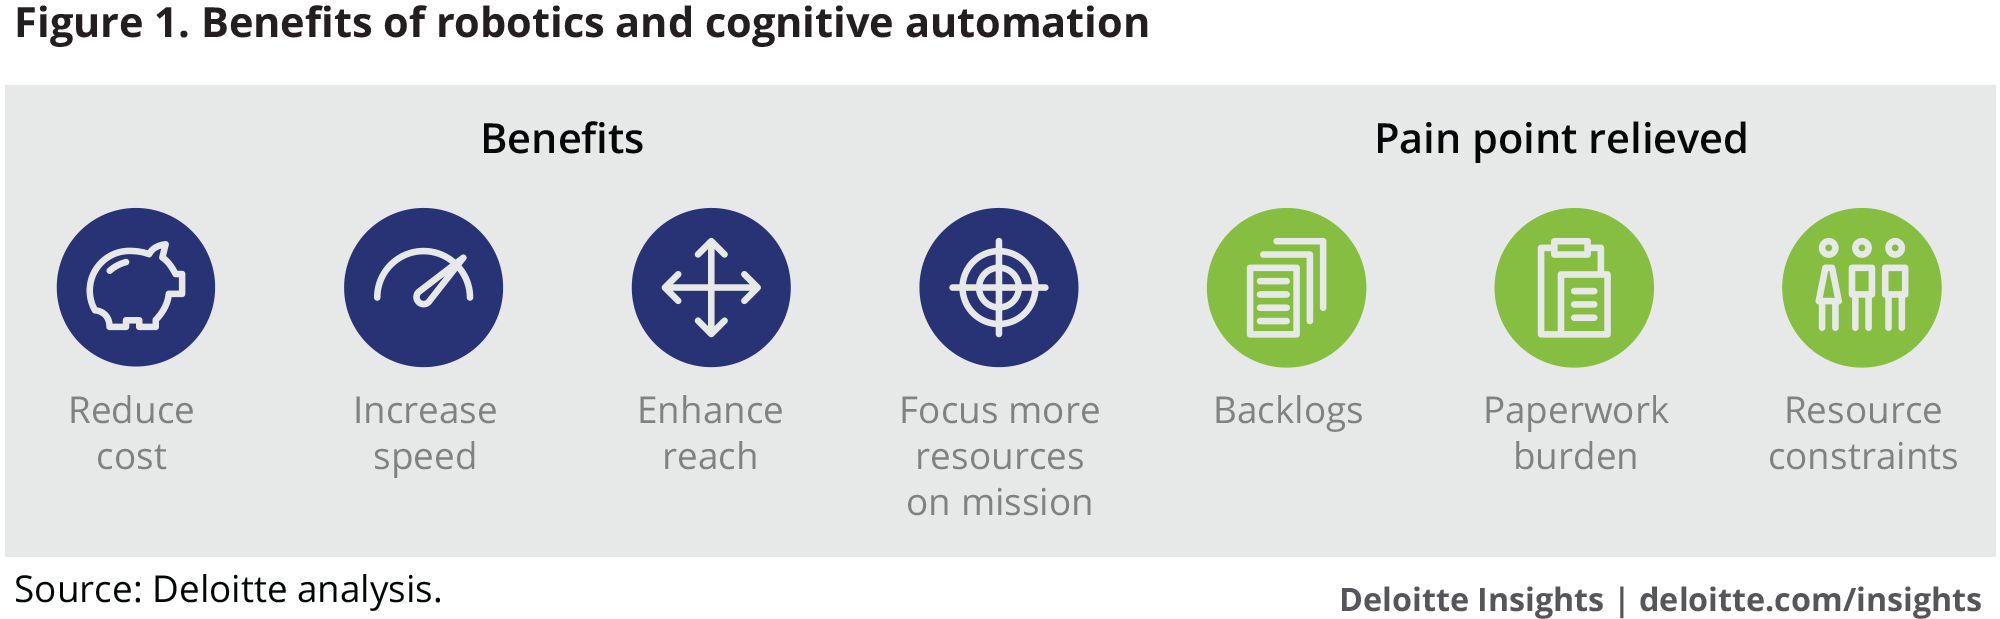 Benefits of robotics and cognitive automation